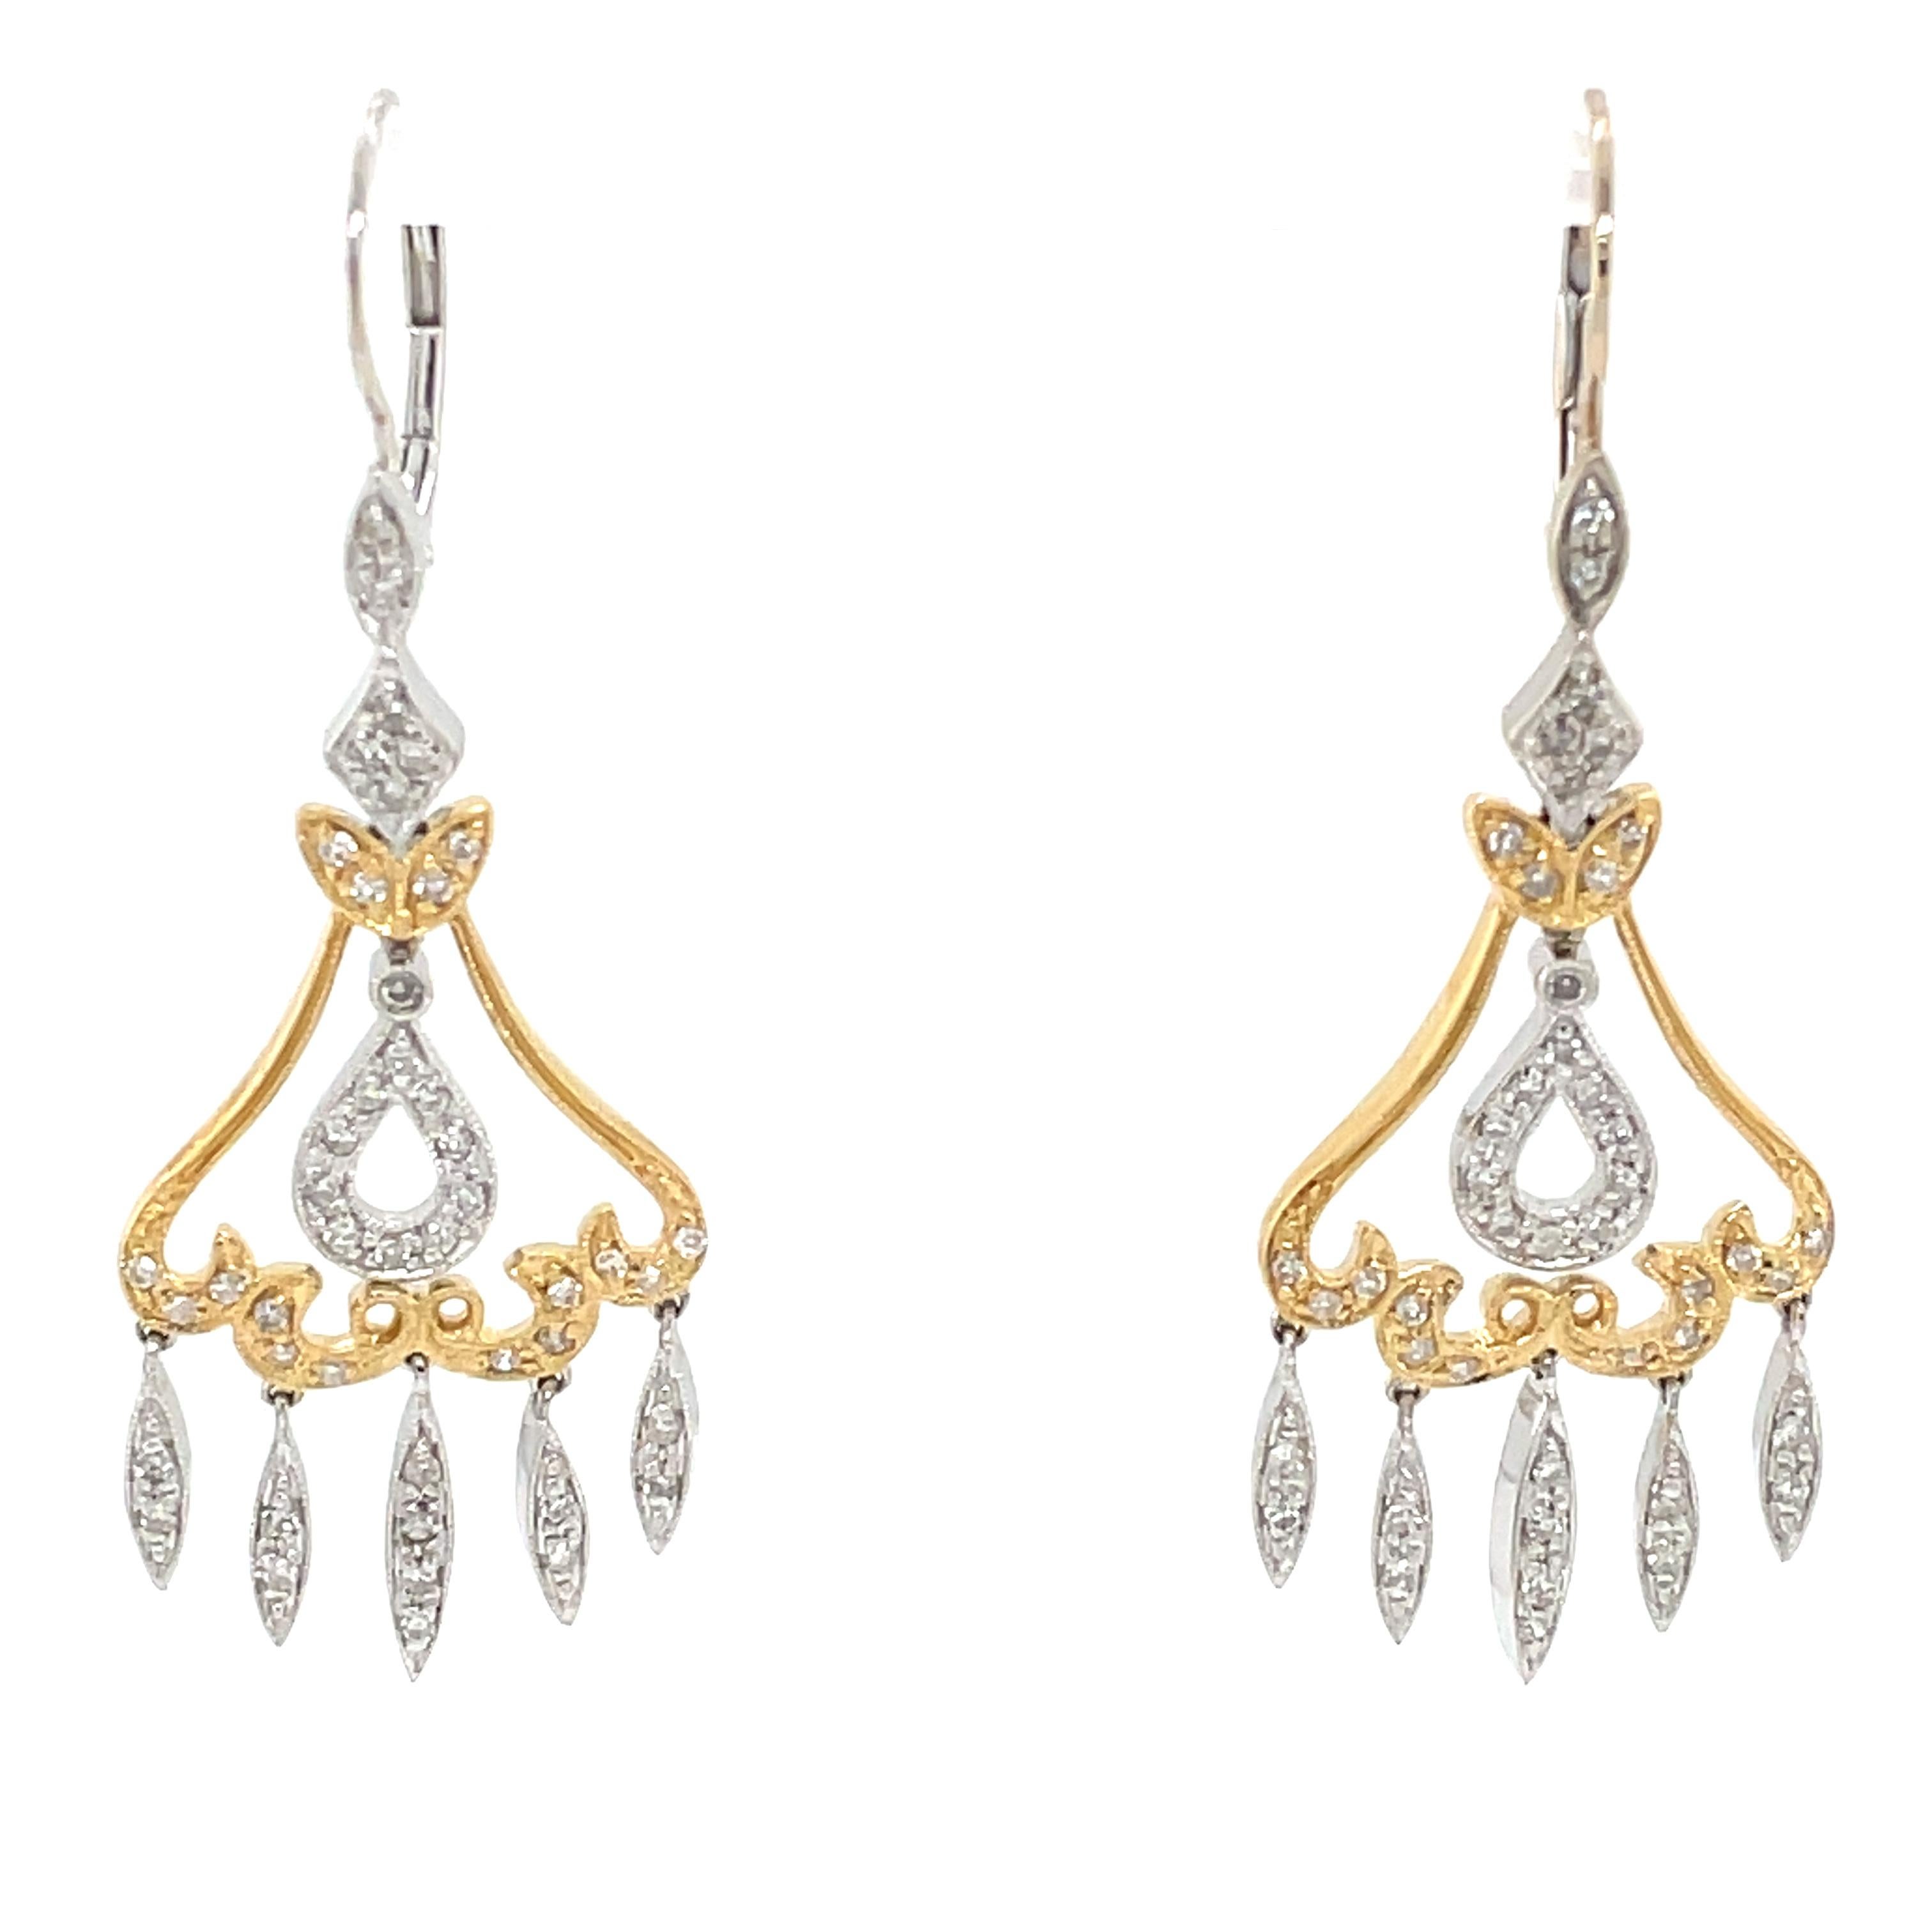 Bright white diamonds light up this two tone elegant pair of 14 karat white and yellow gold chandelier earrings. Dramatic, the pair is very versatile and perfect for bridal, a formal occasion or to dress up an evening wardrobe favorite. The diamond